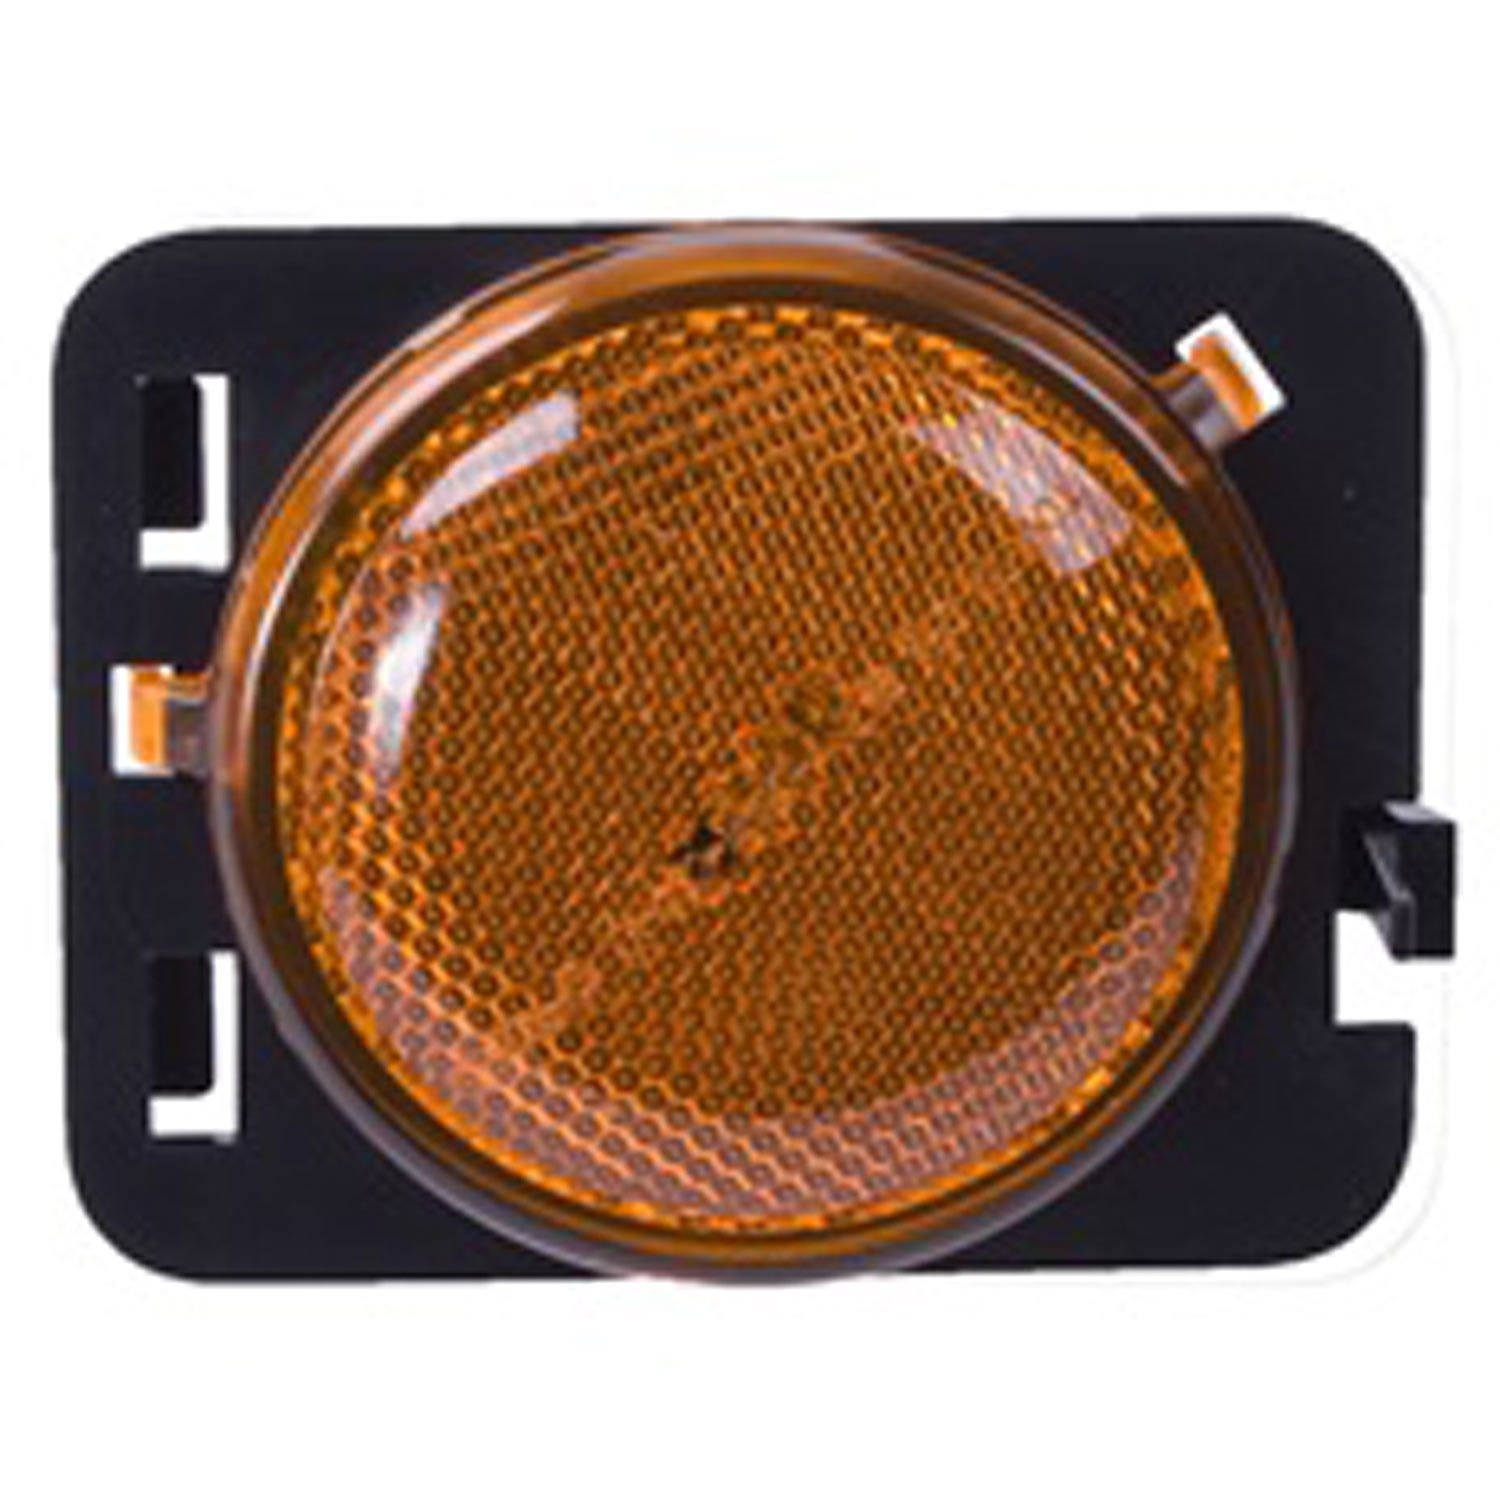 This amber side marker lamp from Omix-ADA fits